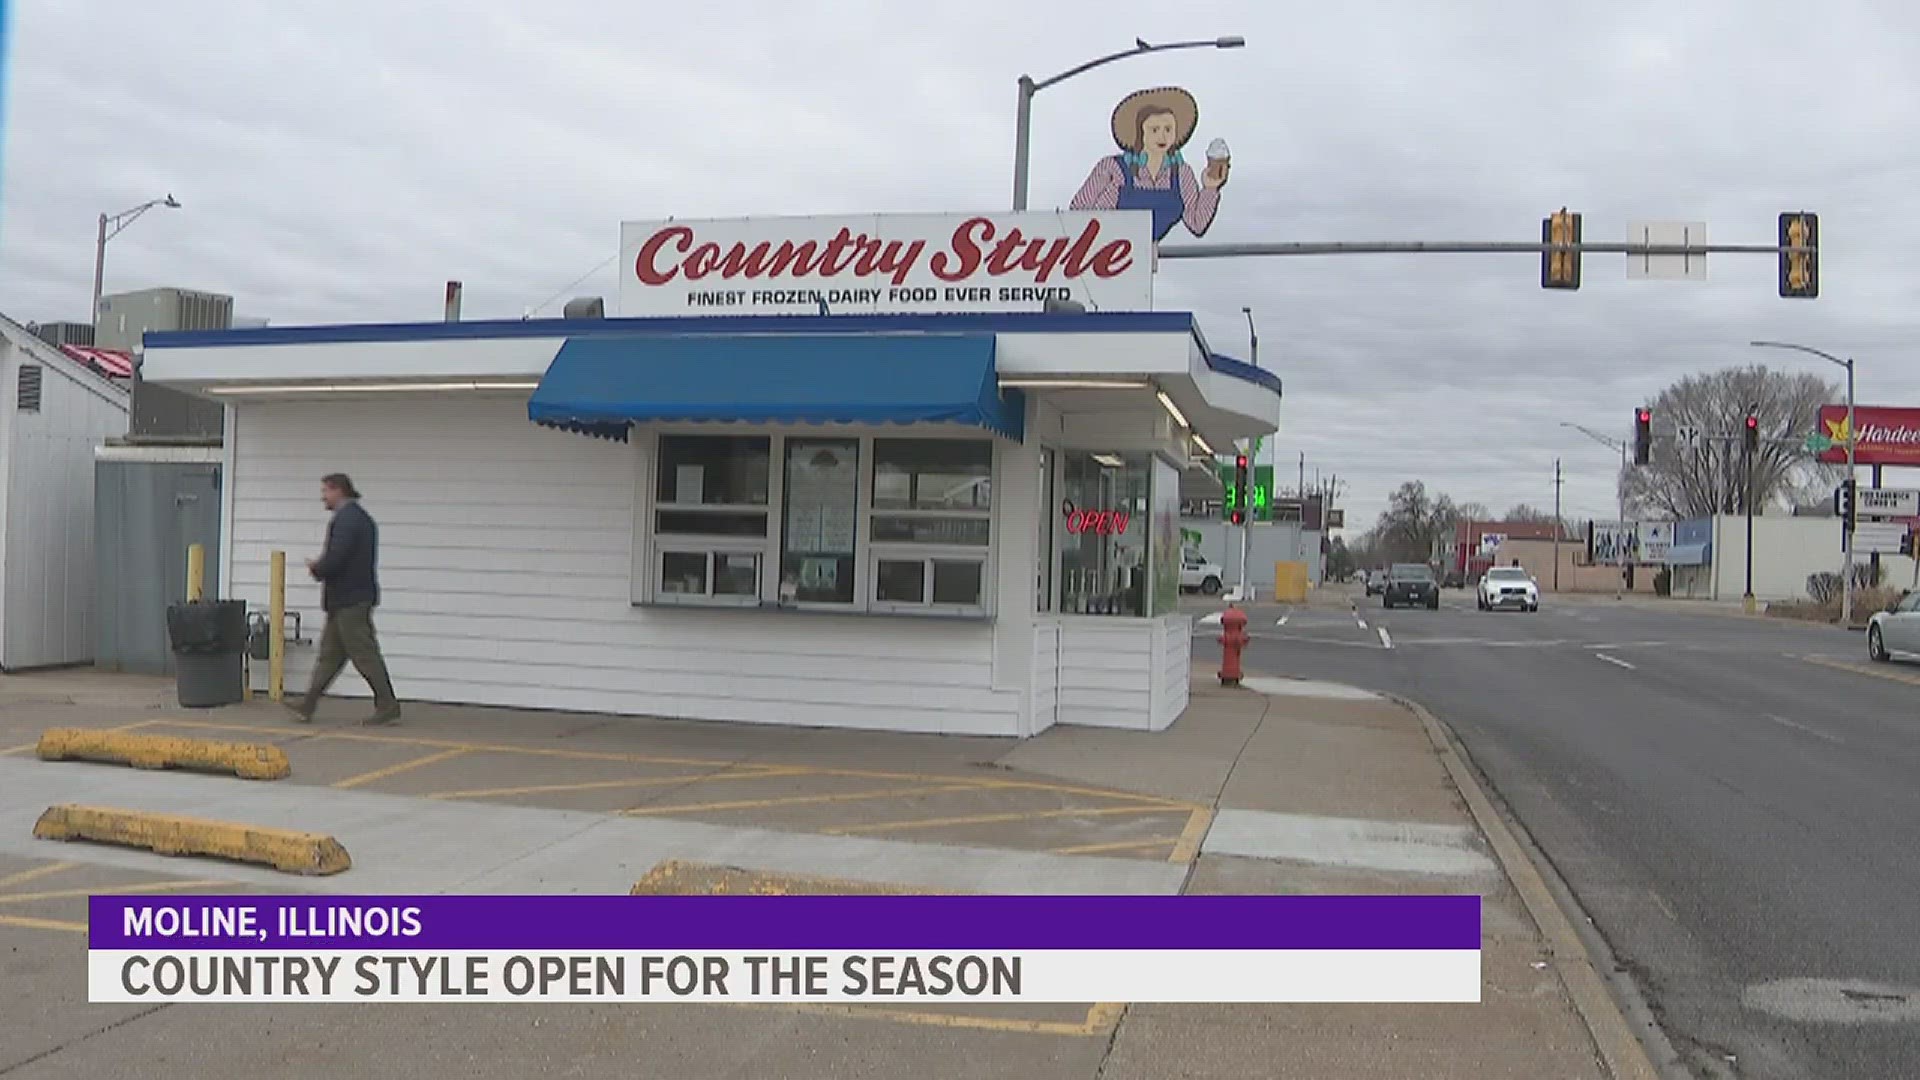 It might still feel like winter, but Quad Citizens are getting a taste of summer through the local ice cream shop.